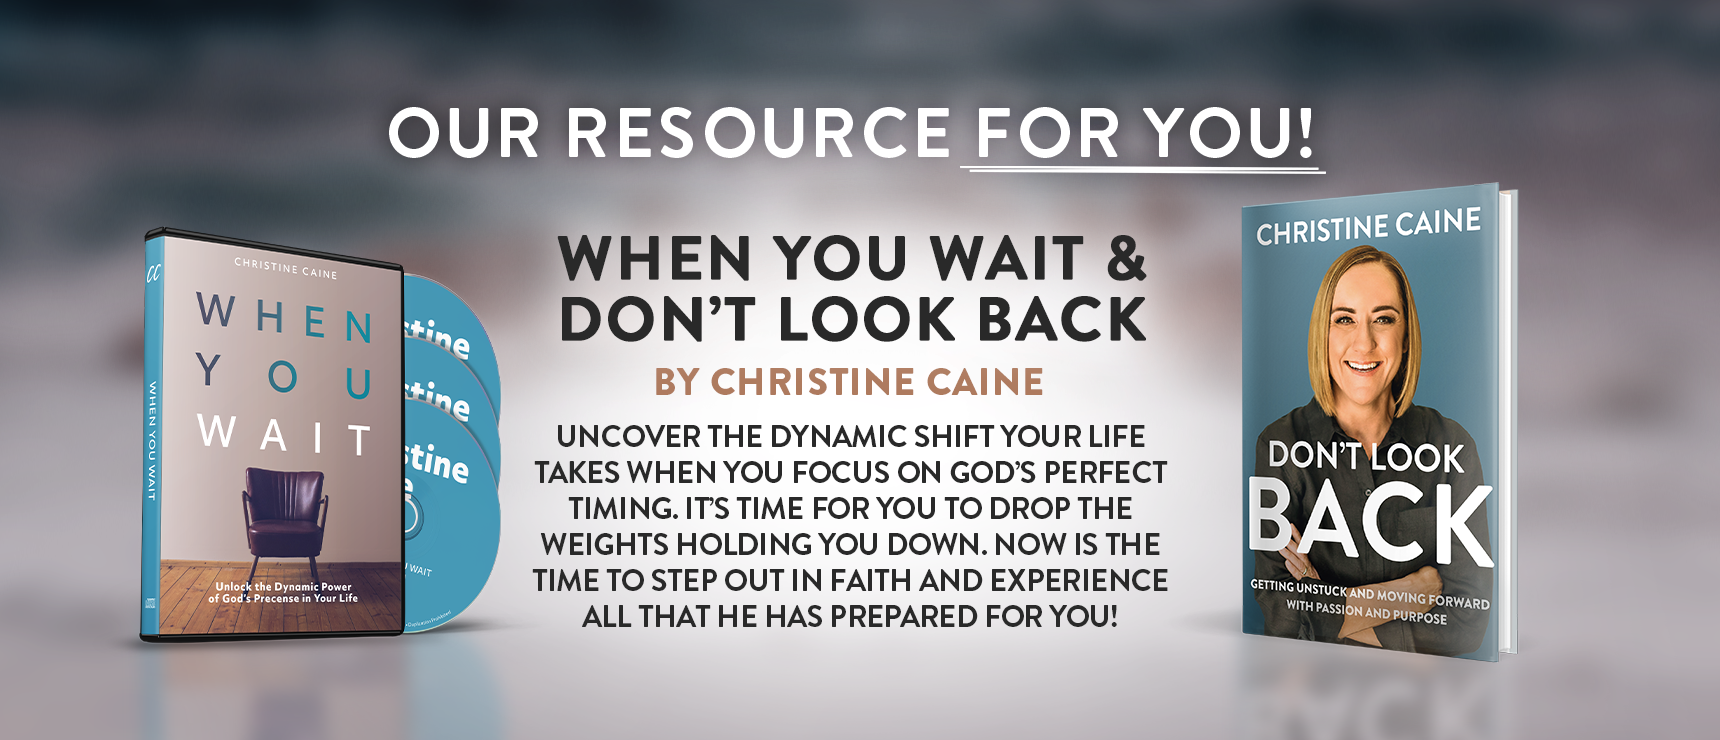 When You Wait + Don't Look Back by Christine Caine on TBN